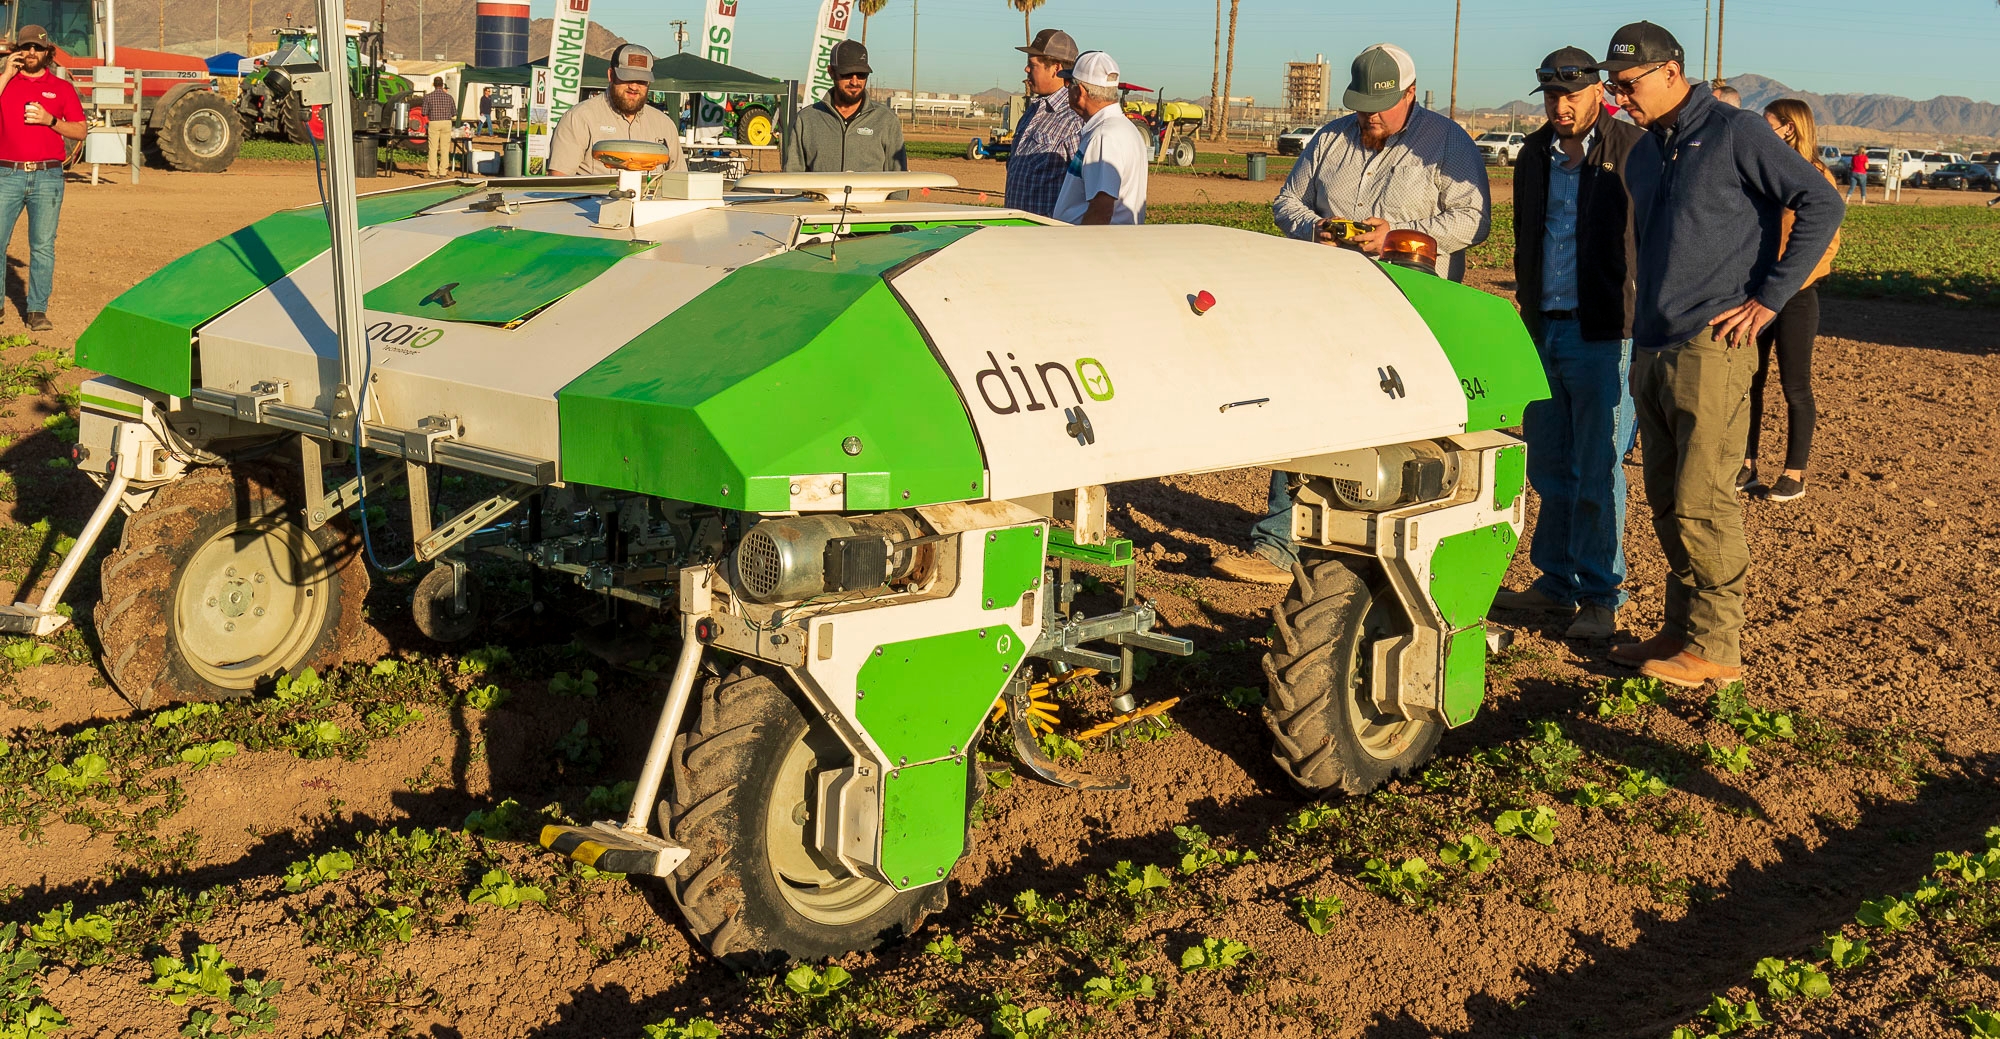 Shah Ond sikkerhed Robotic weed removal options come to market | Farm Progress